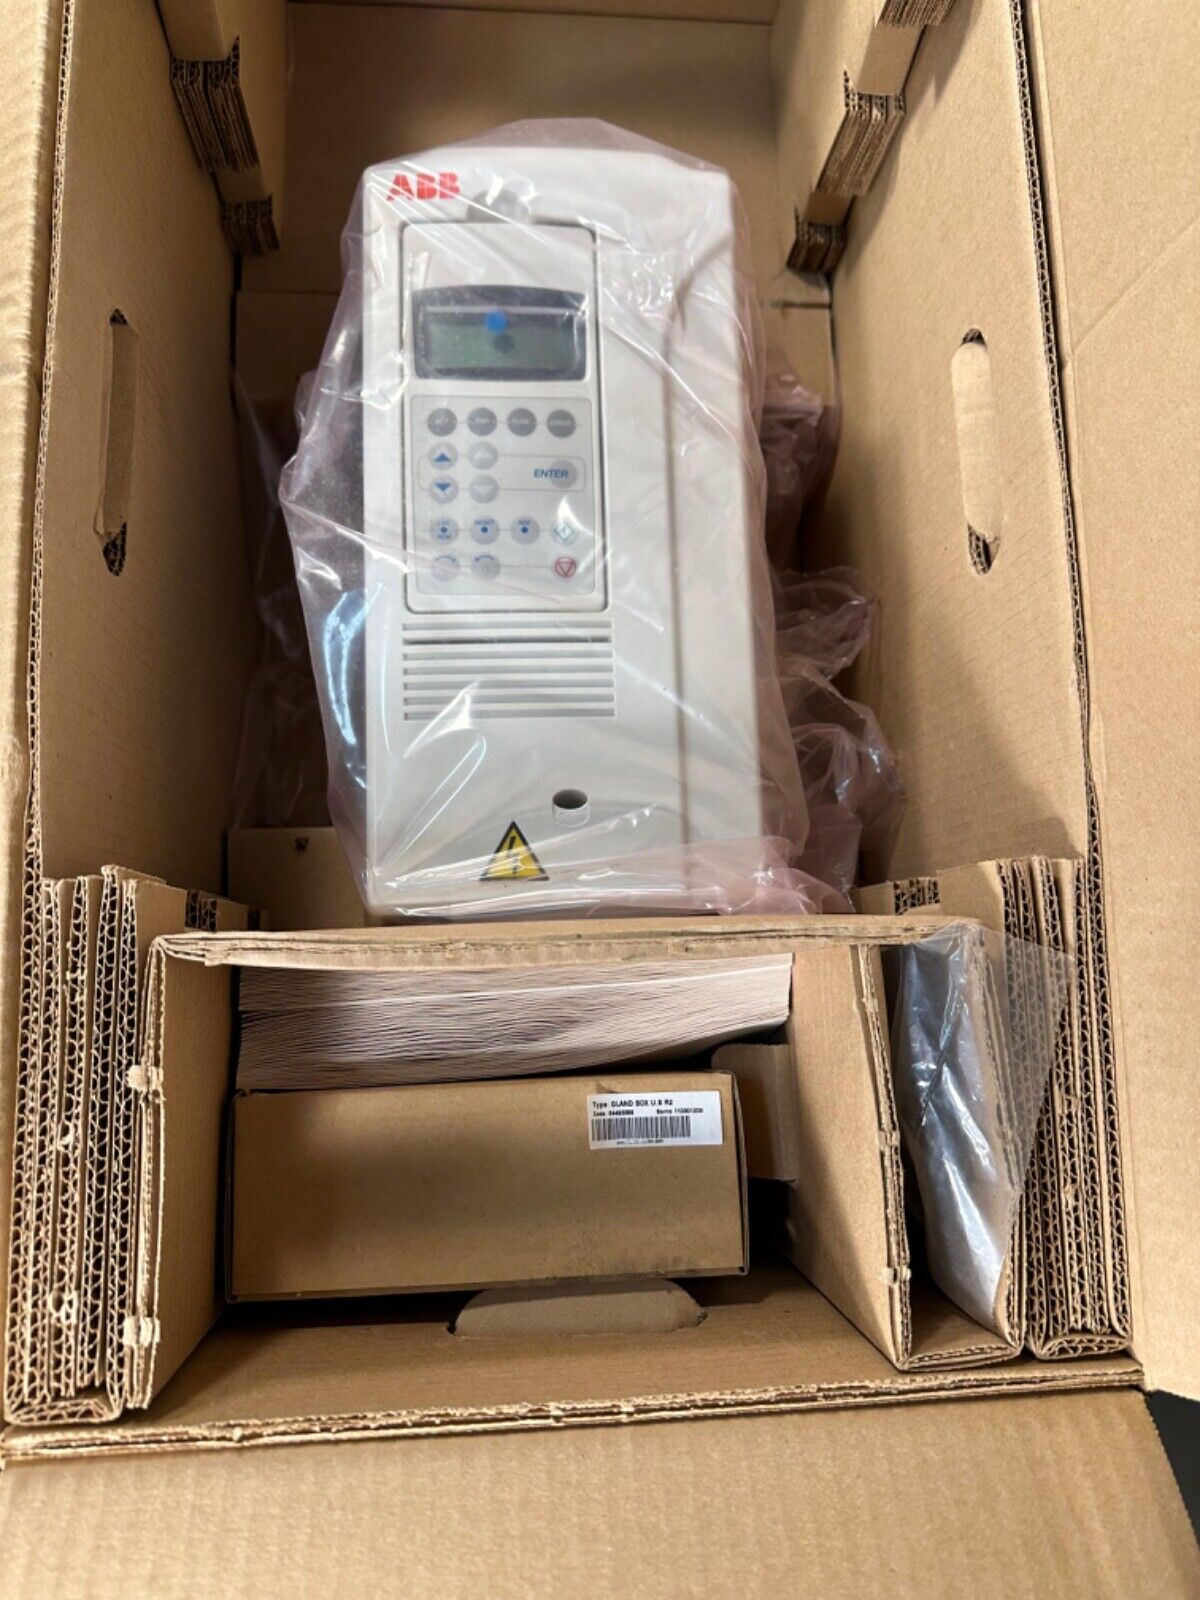 ABB Variable Frequency Drive ACS800-U1-0016-5 - P901 NEW  (1G-23)